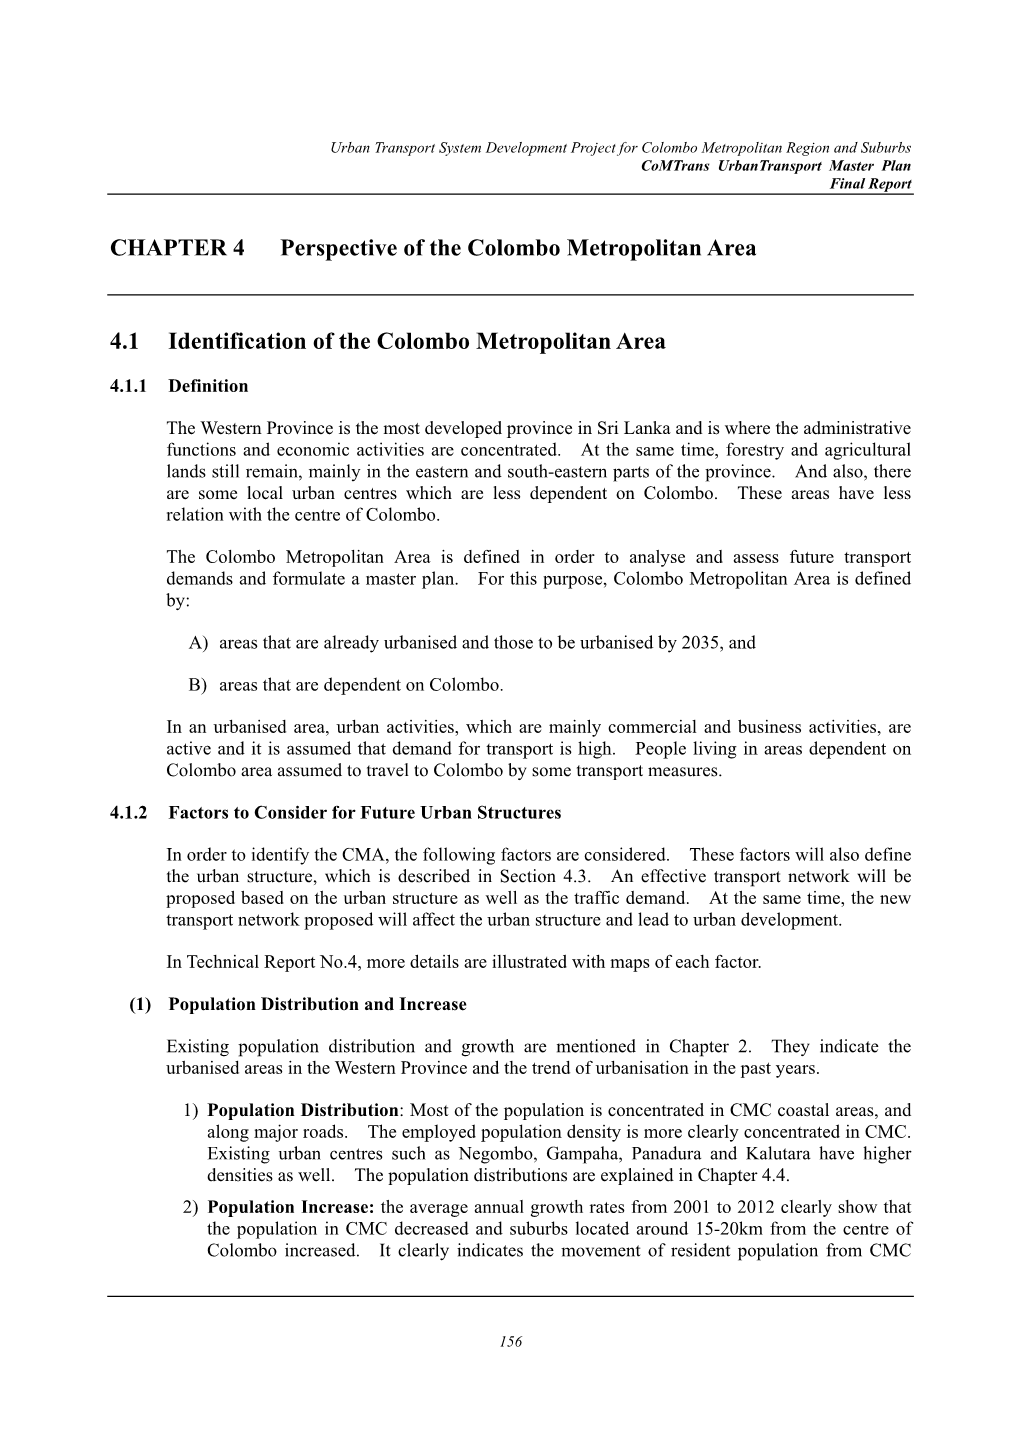 CHAPTER 4 Perspective of the Colombo Metropolitan Area 4.1 Identification of the Colombo Metropolitan Area